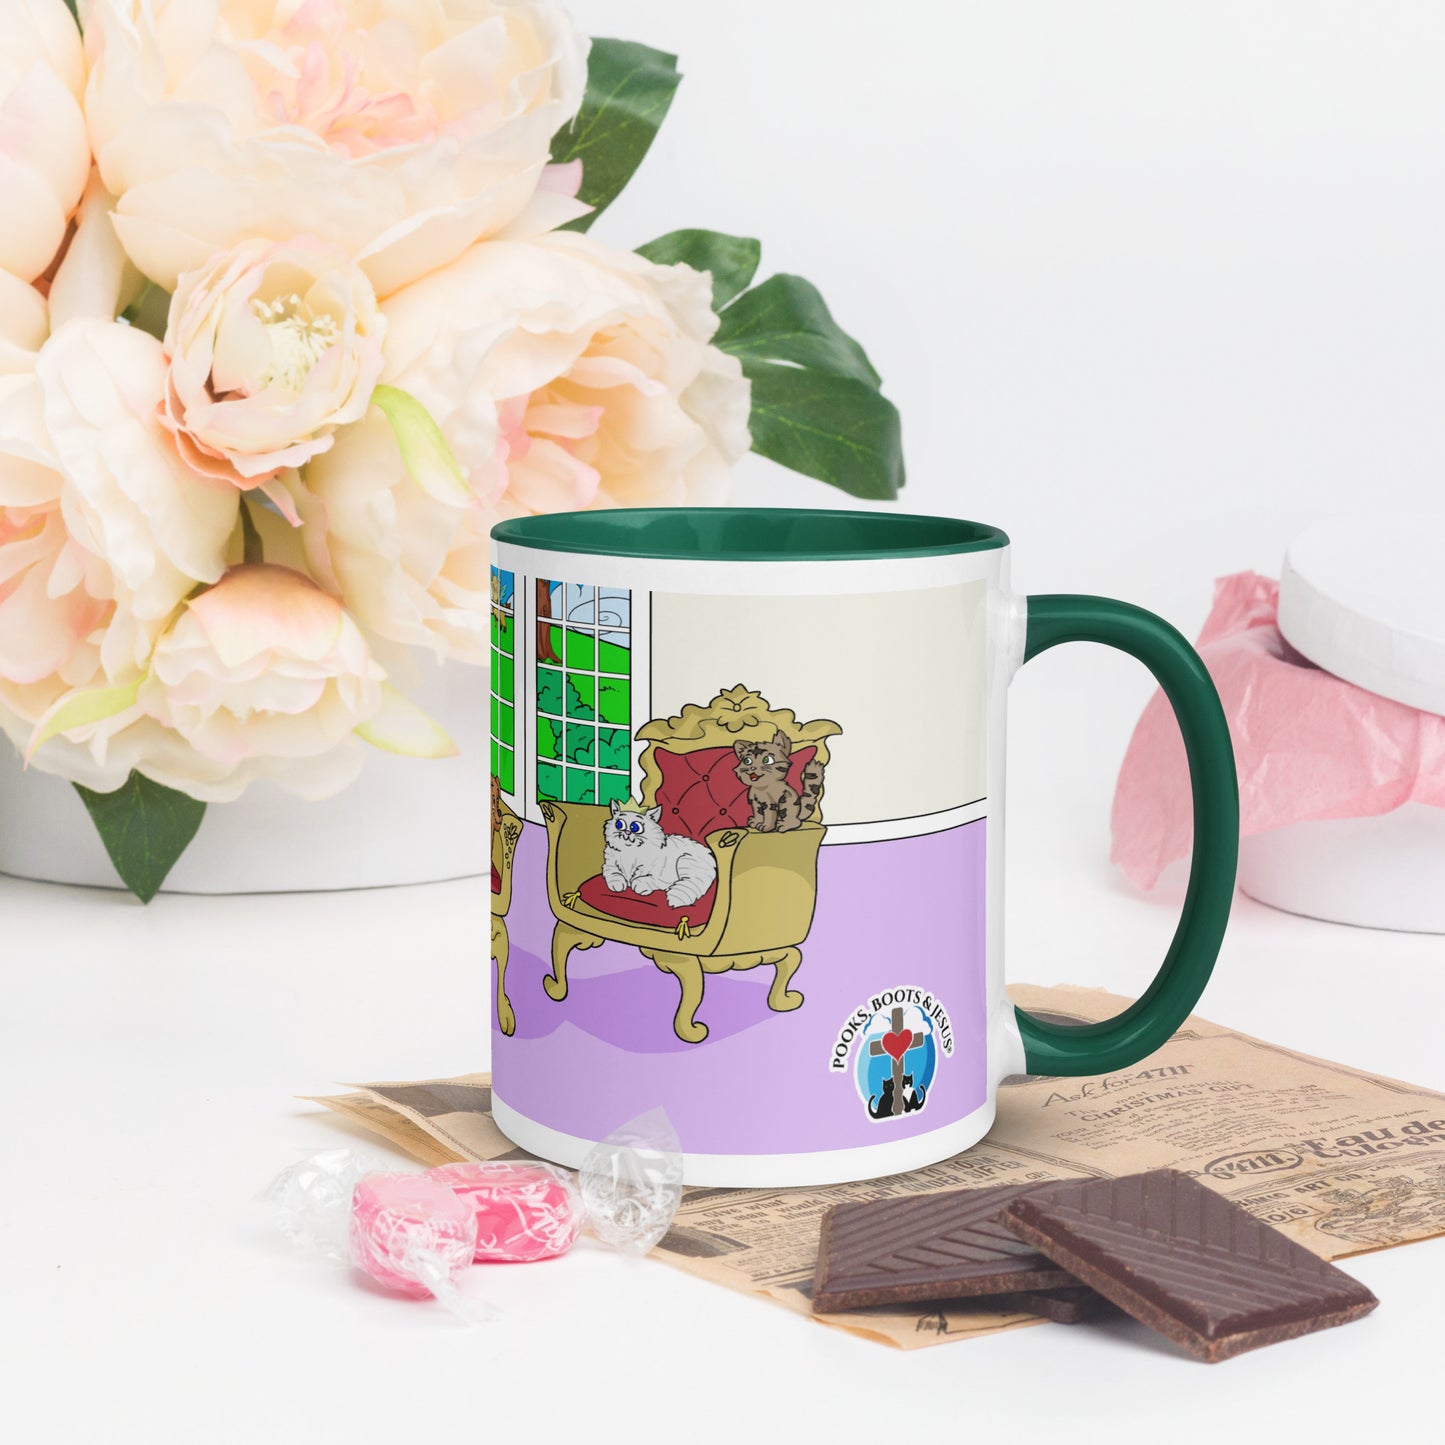 Pooks, Boots and Jesus Characters Mug with Color Inside